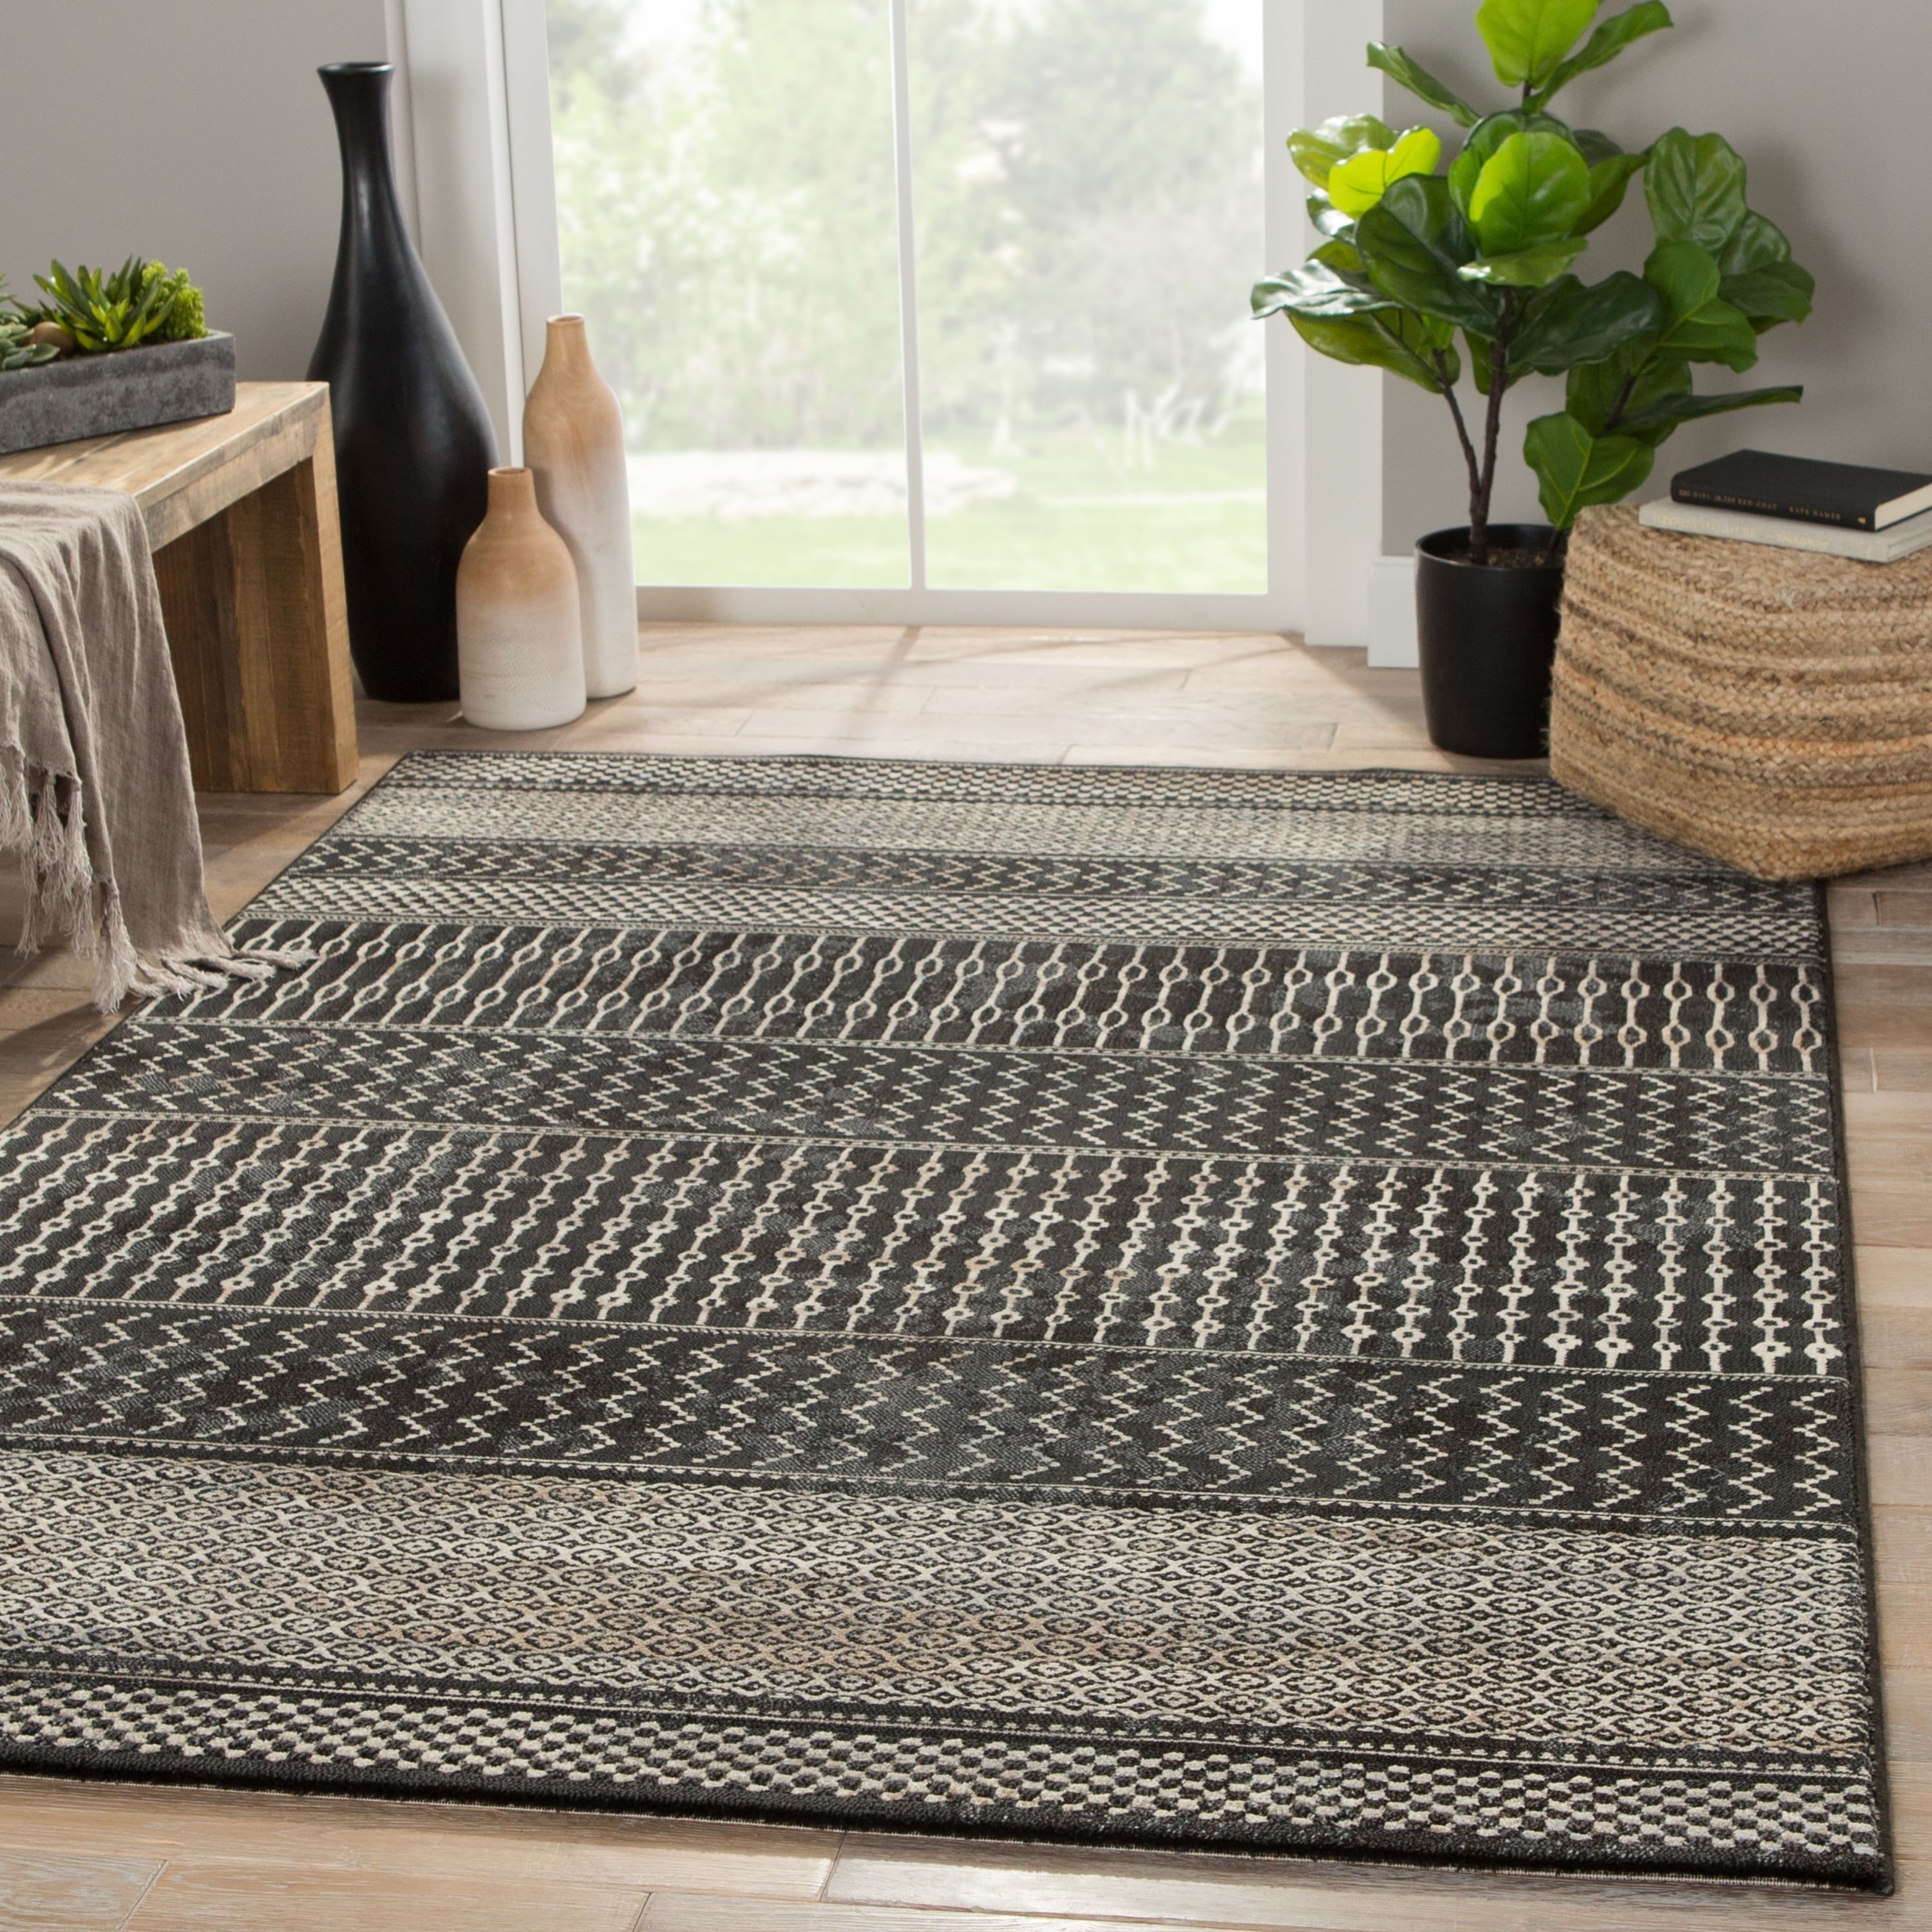 Buy 5x8 6x9 Rugs Online at Our Best Area Rugs Deals